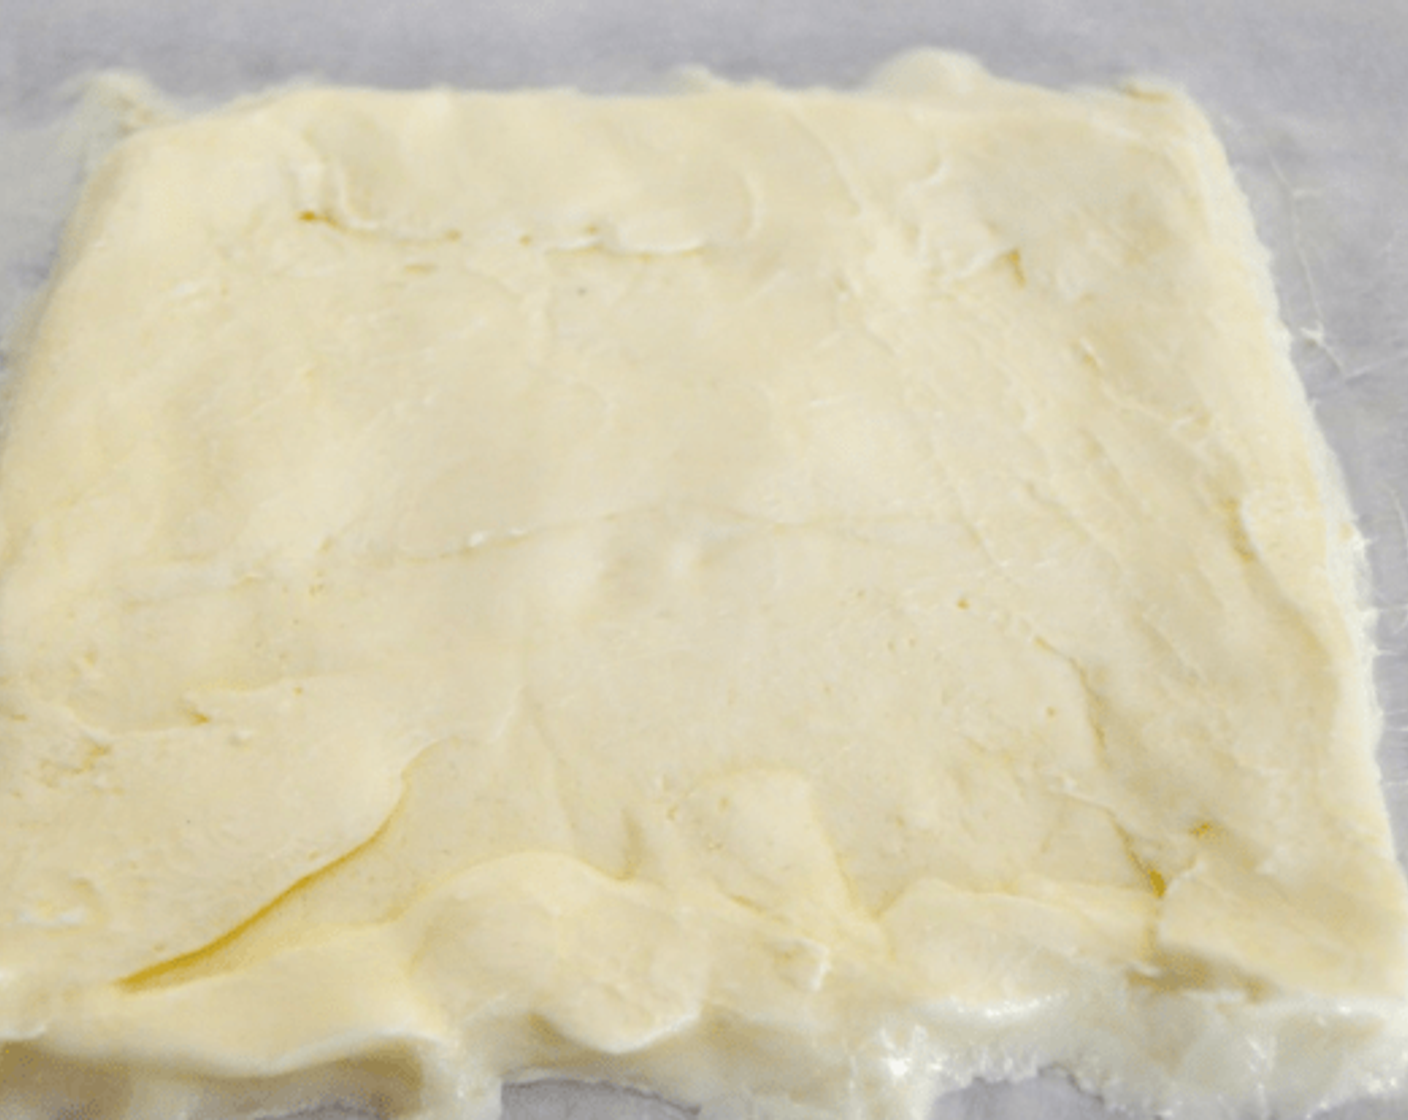 step 6 Take the block of butter and put it diagonally onto the middle of the square of dough so that a side of the butter faces a corner of the dough. Bring the corners of dough over the butter to completely envelope it. Roll it out into a 16 x 8 rectangle.